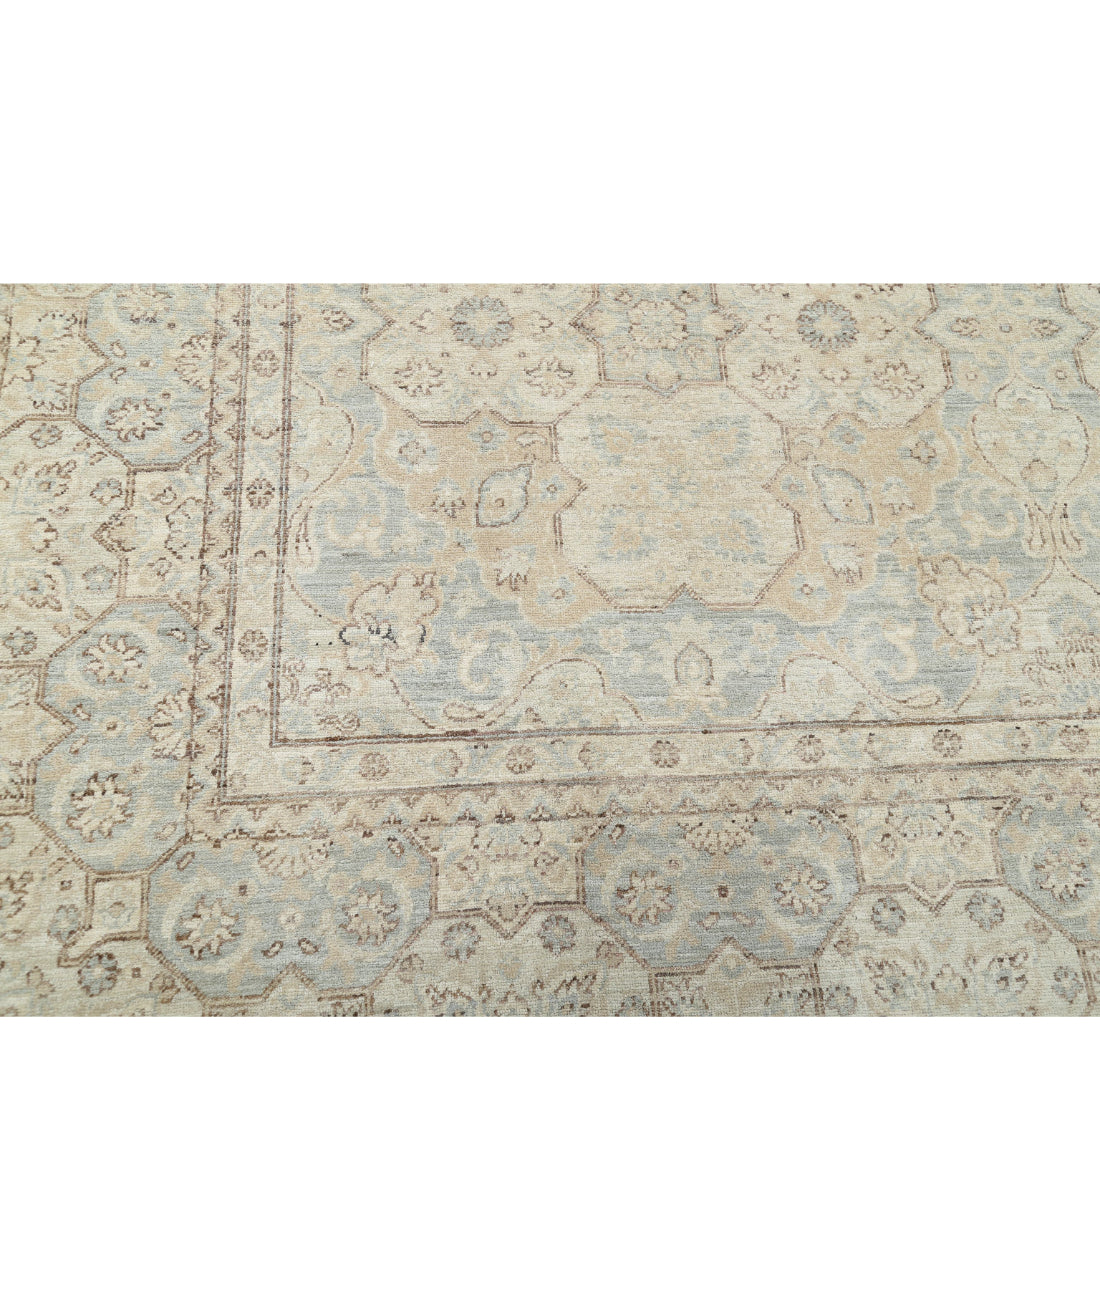 Hand Knotted Serenity Wool Rug - 9'0'' x 11'3'' 9'0'' x 11'3'' (270 X 338) / Blue / Ivory